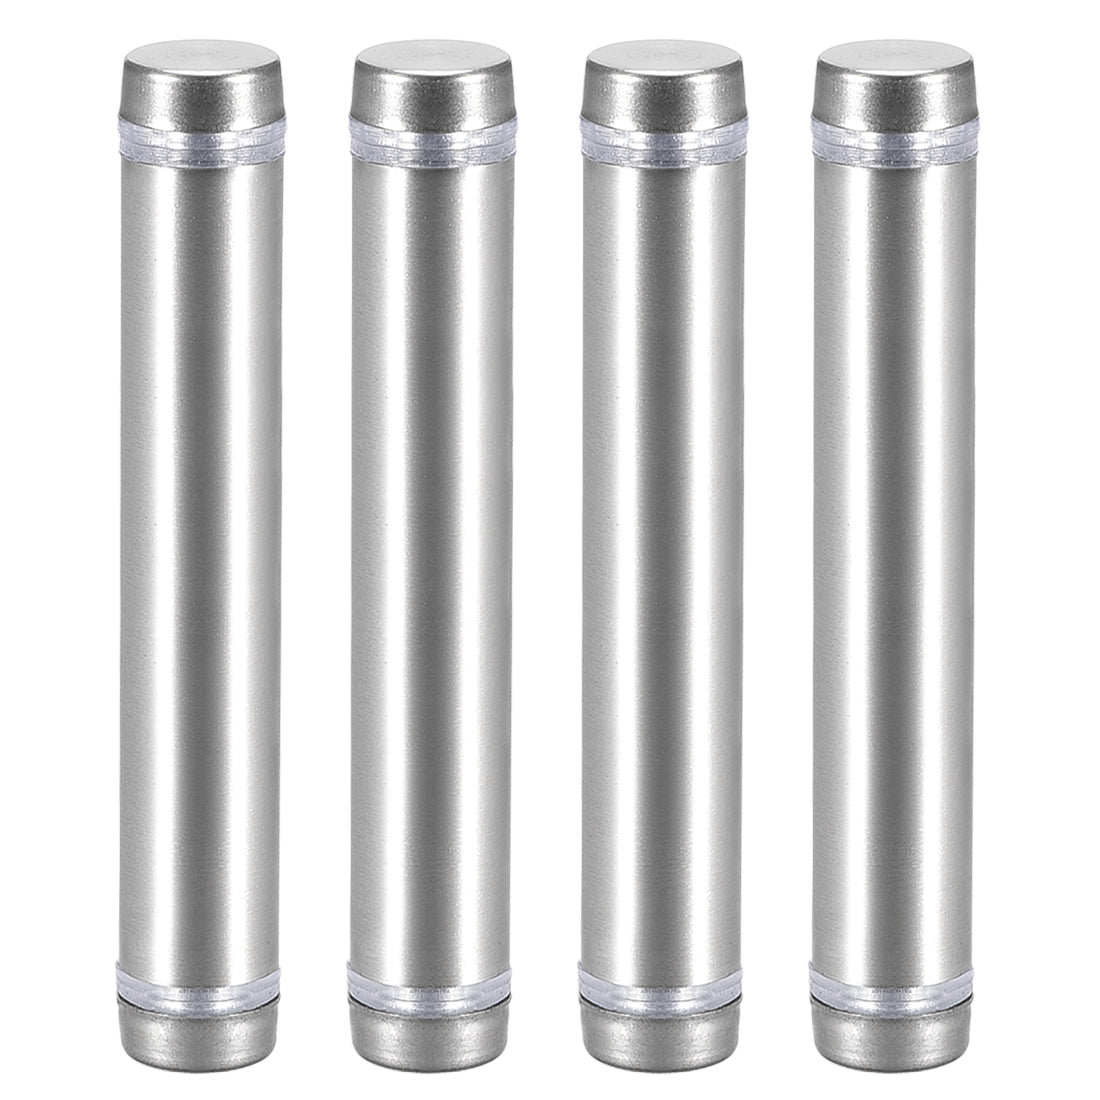 uxcell Uxcell Glass Standoff Double Head Stainless Steel Standoff Holder 12mm x 74mm 4 Pcs